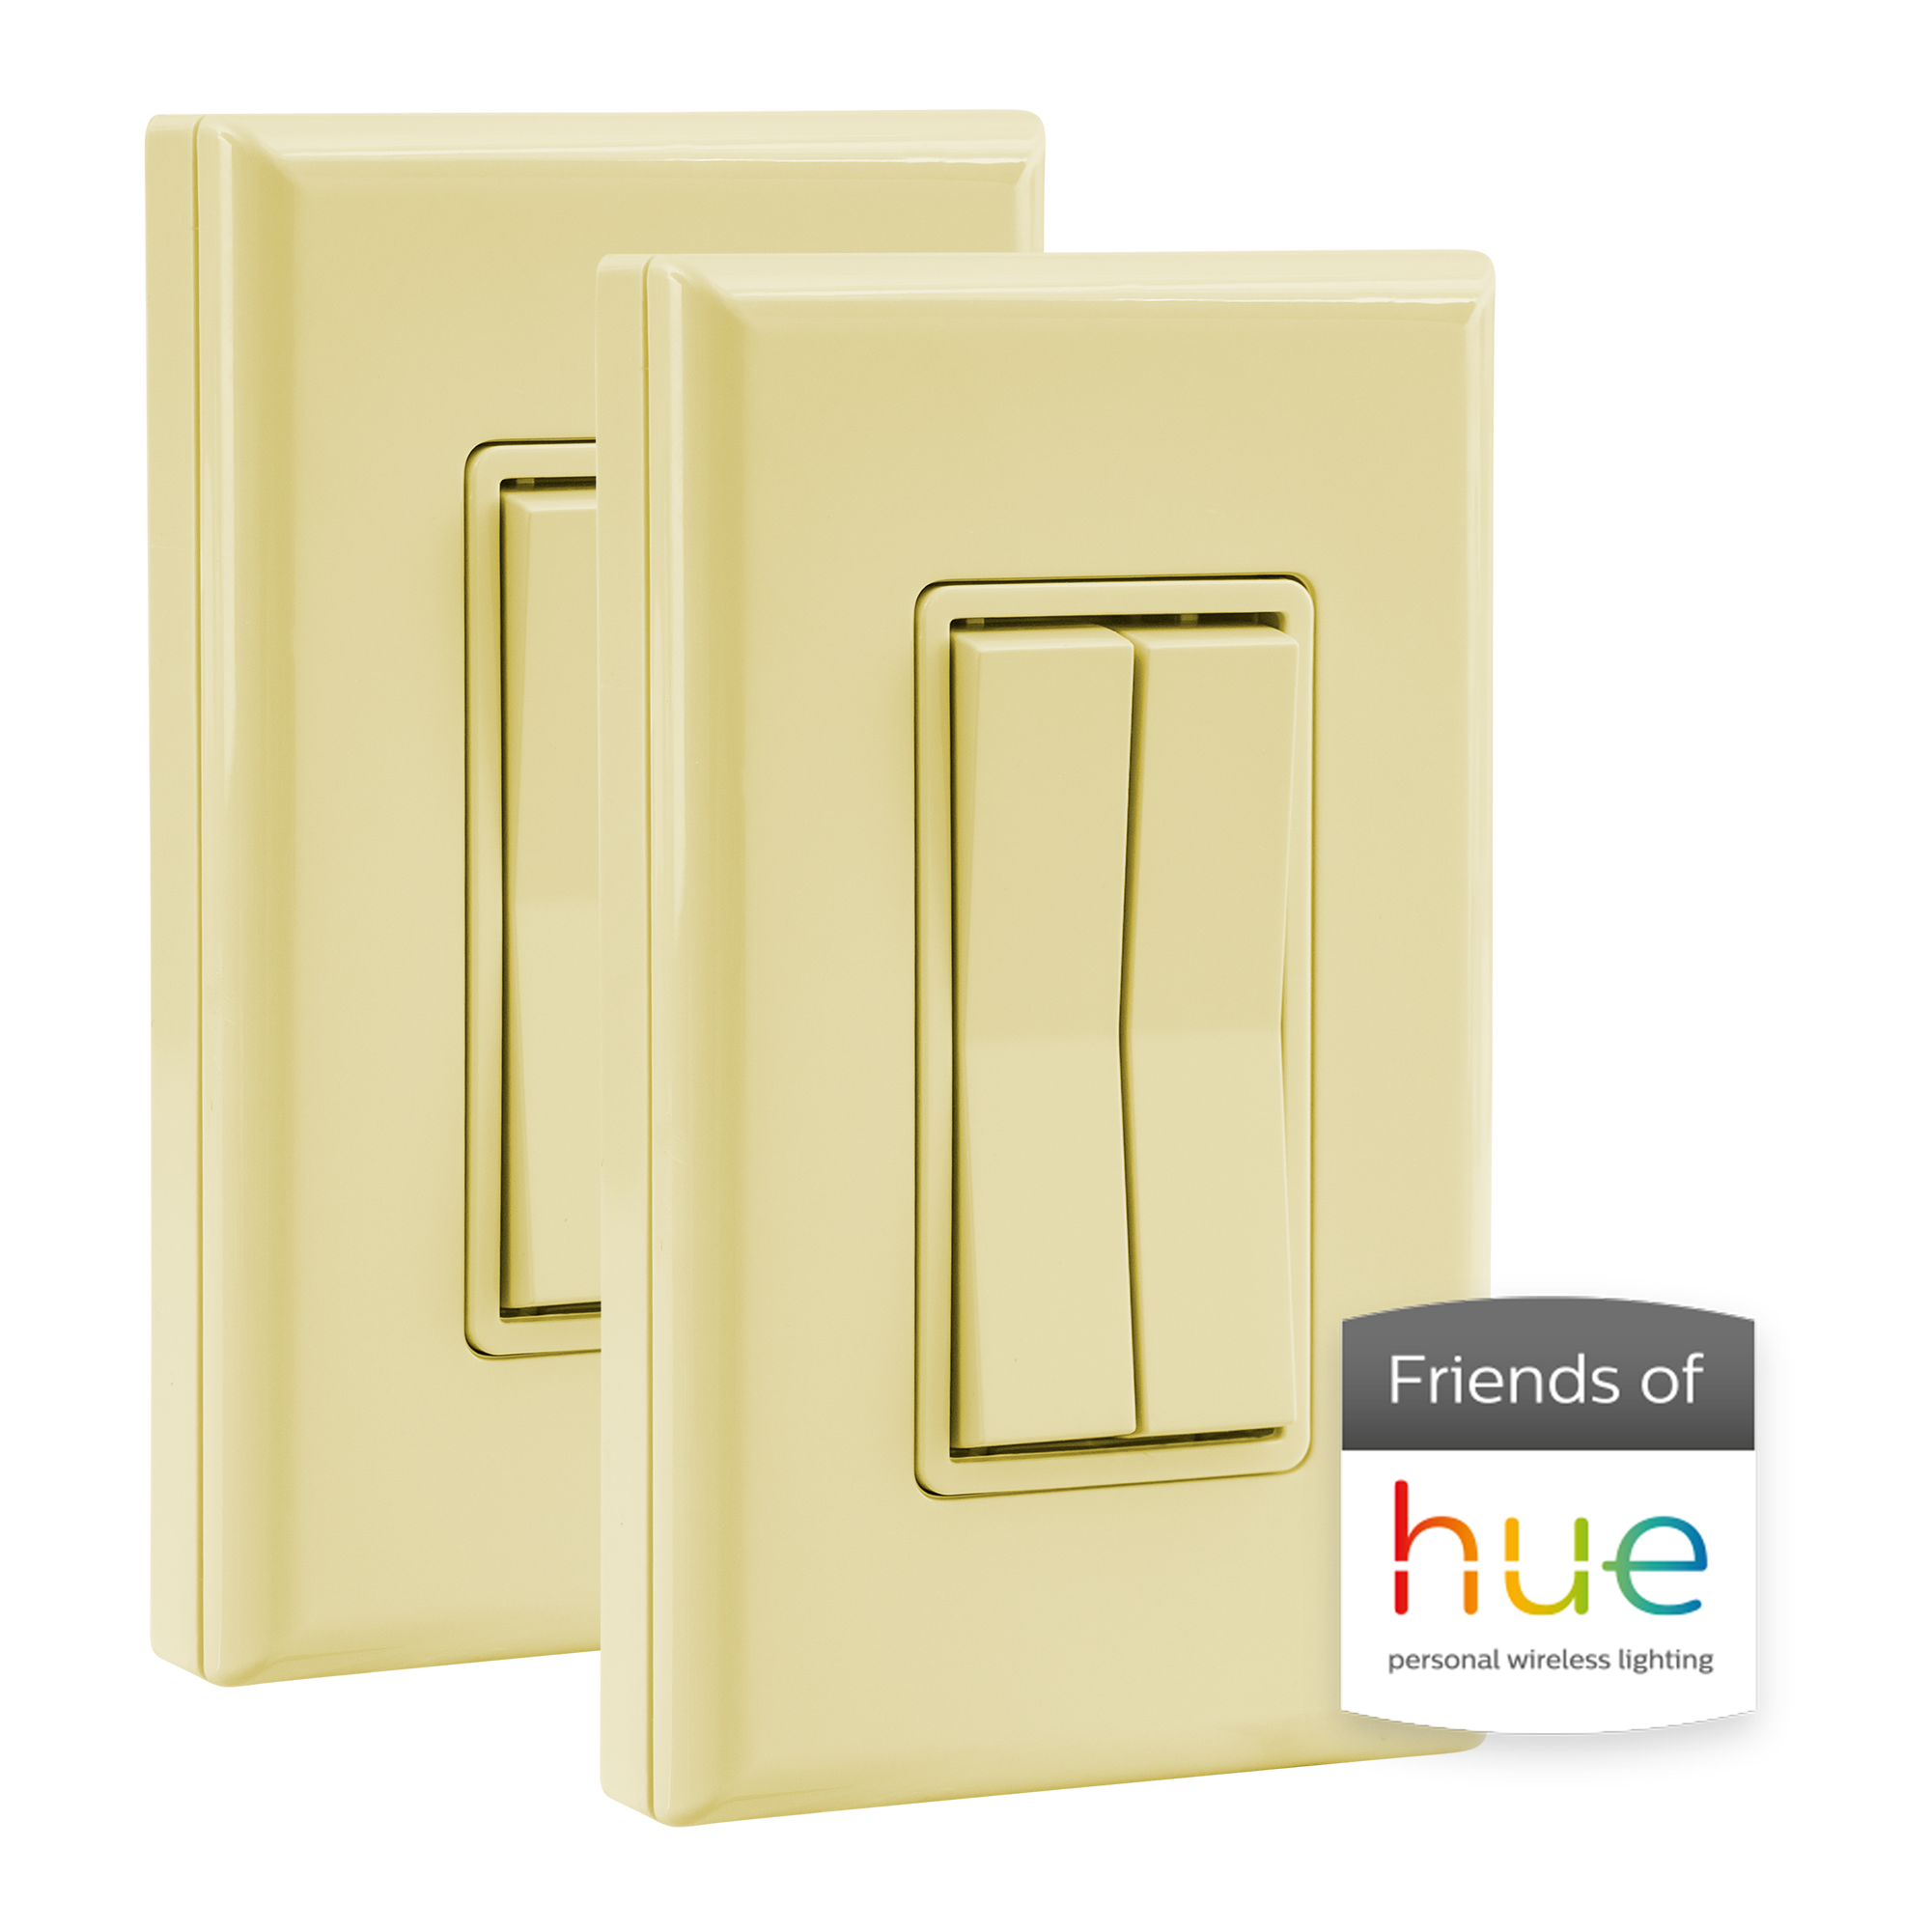 Philips Hue Wireless Smart Light Switch Button, White - 1 Pack